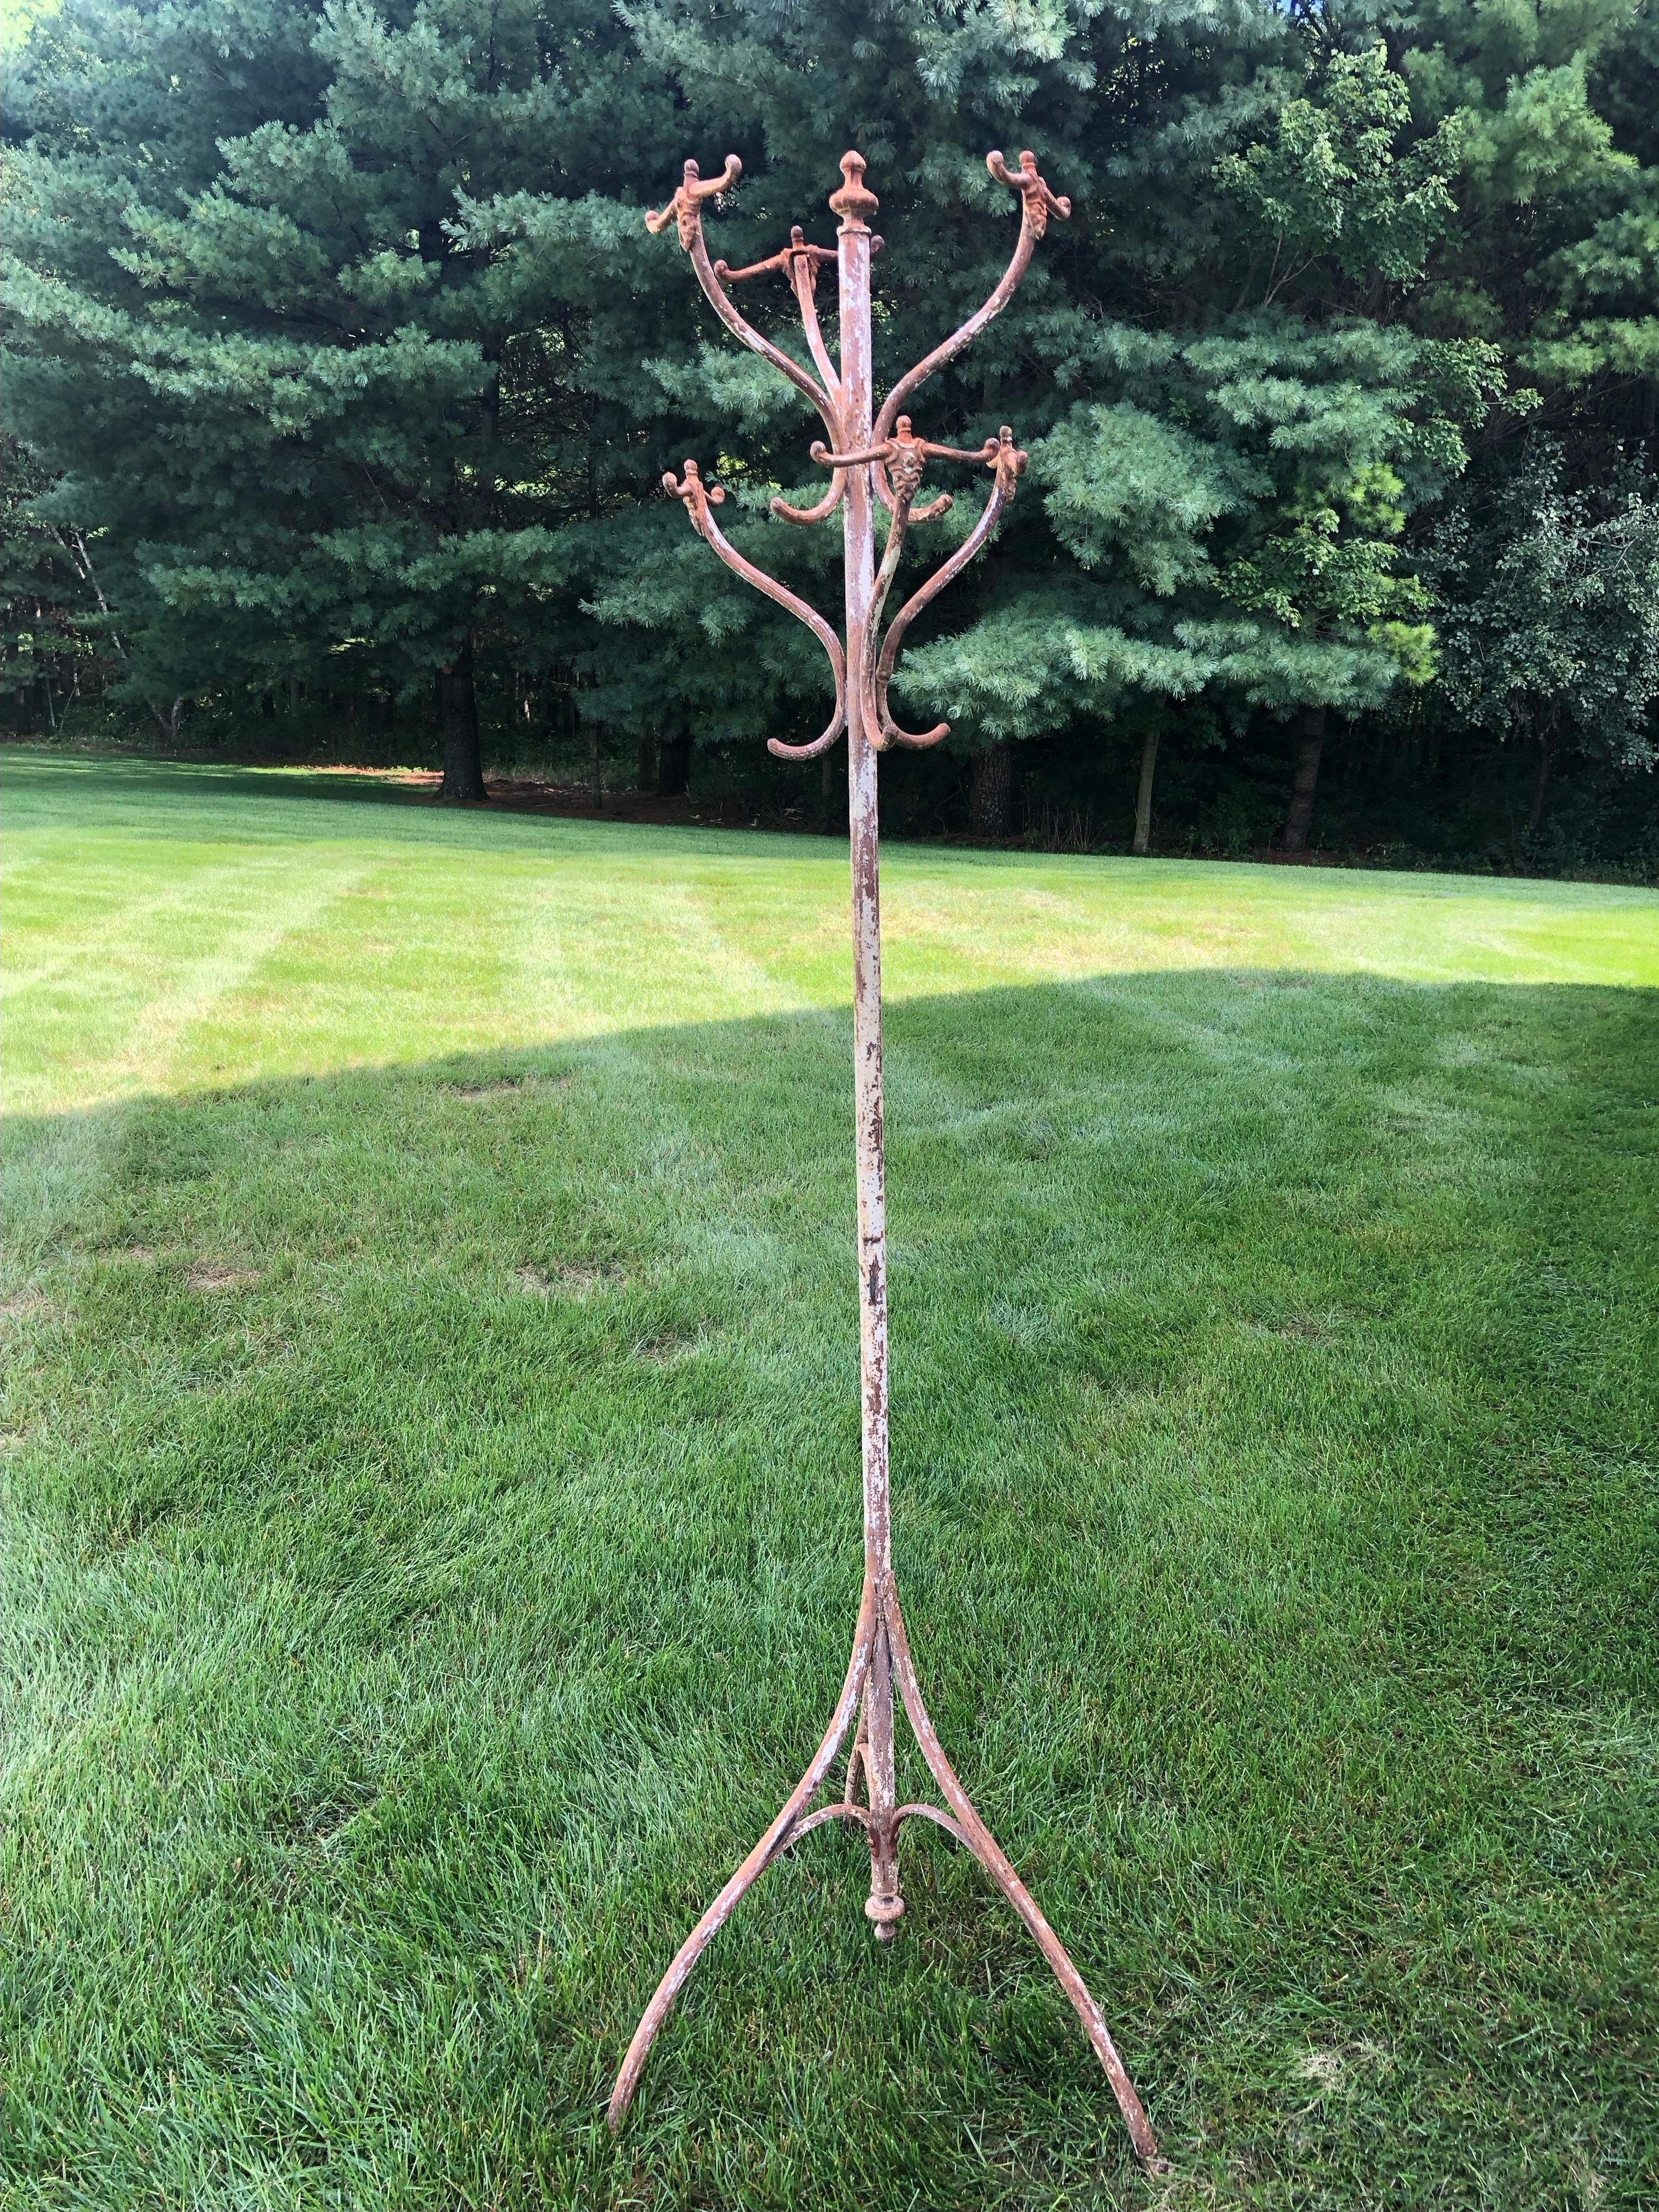 Rich in character and fully functional European cast iron coat rack having a marvelous aged patina with rust color and some areas of worn white paint.